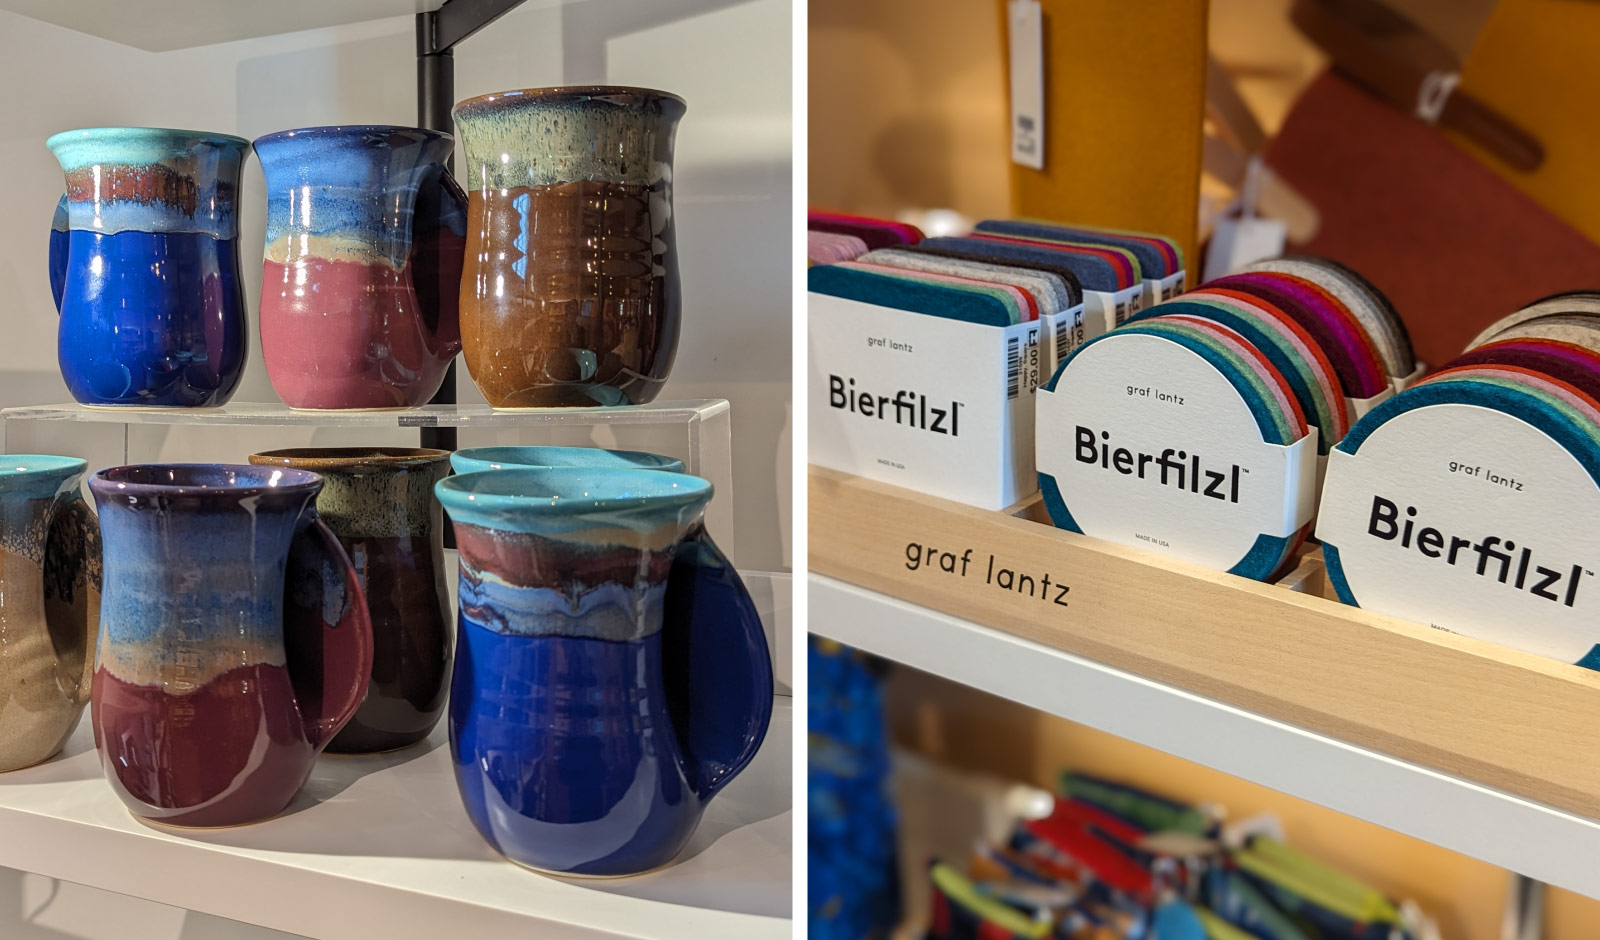 A display of handmade, ceramic mugs in multi-color glazes | An assortment of colorful wool felt coasters